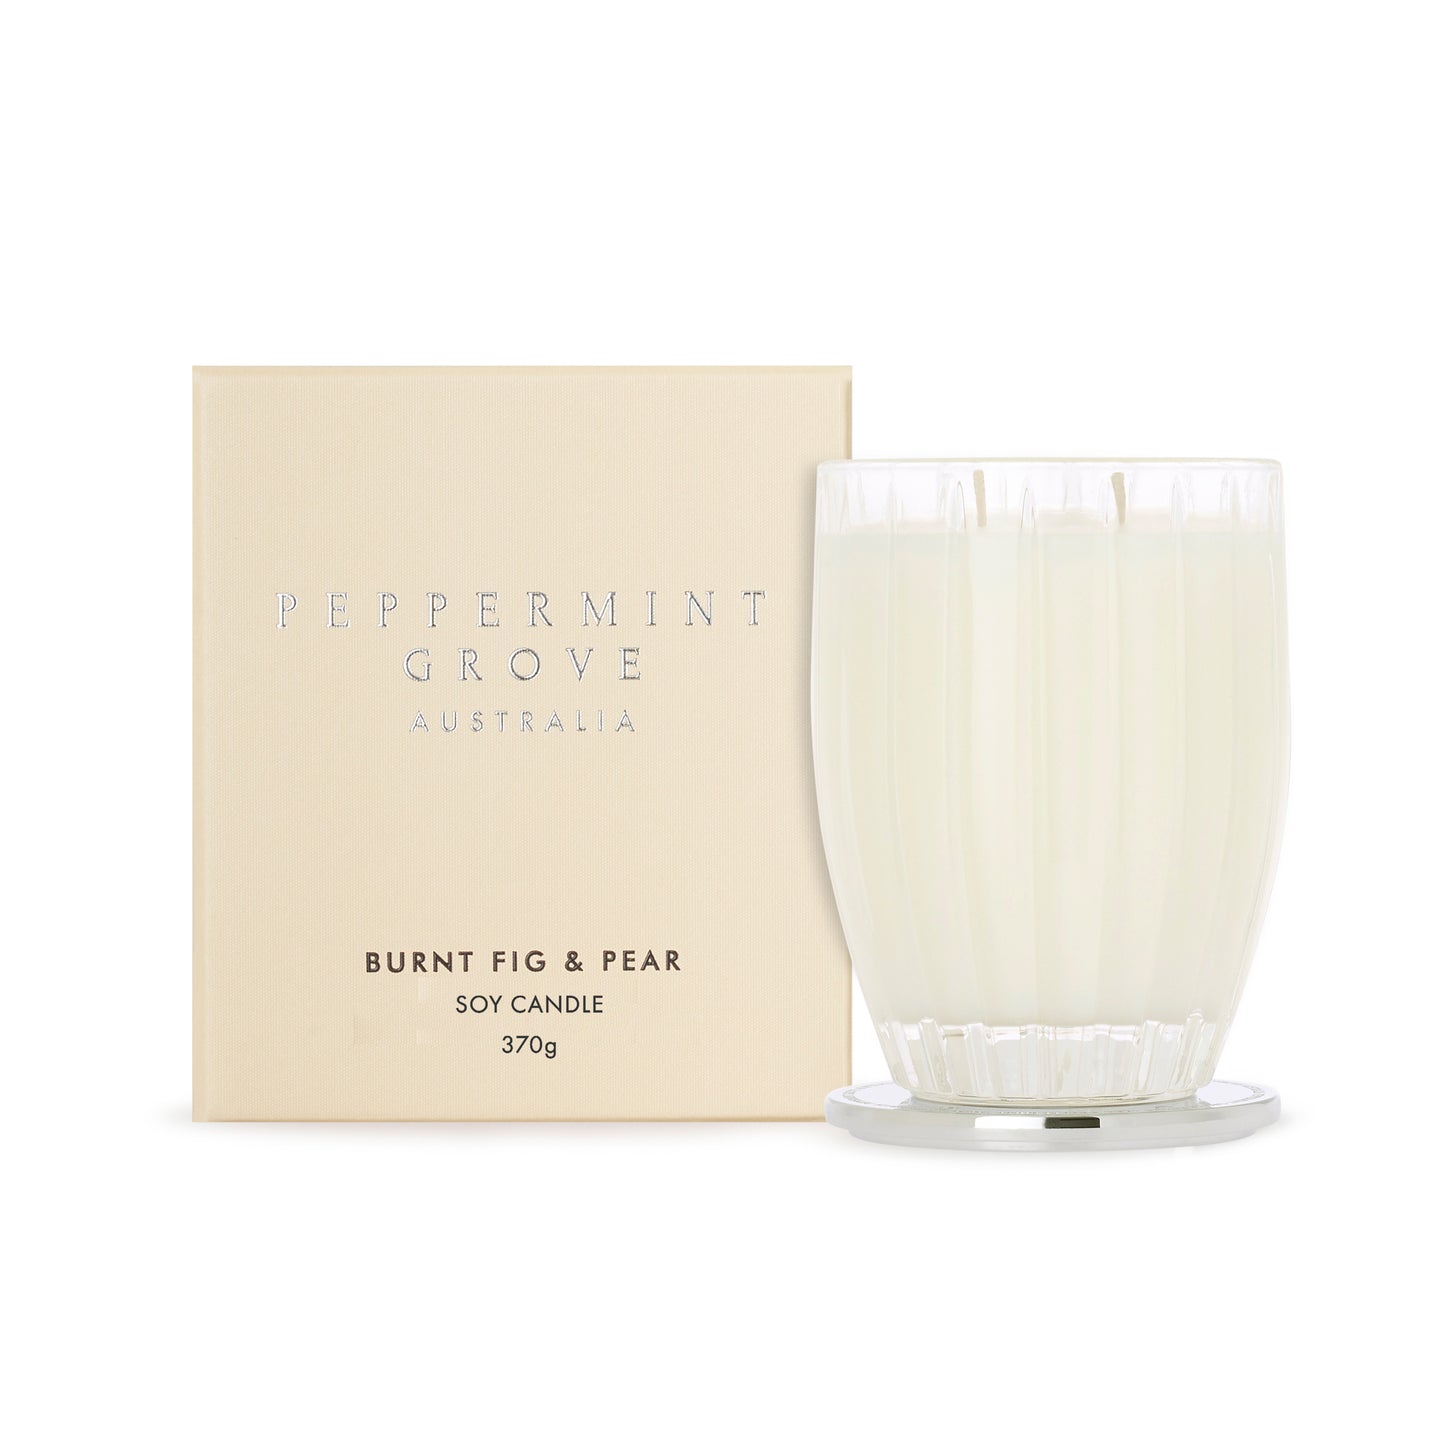 Burnt Fig & Pear Soy Candle 370g